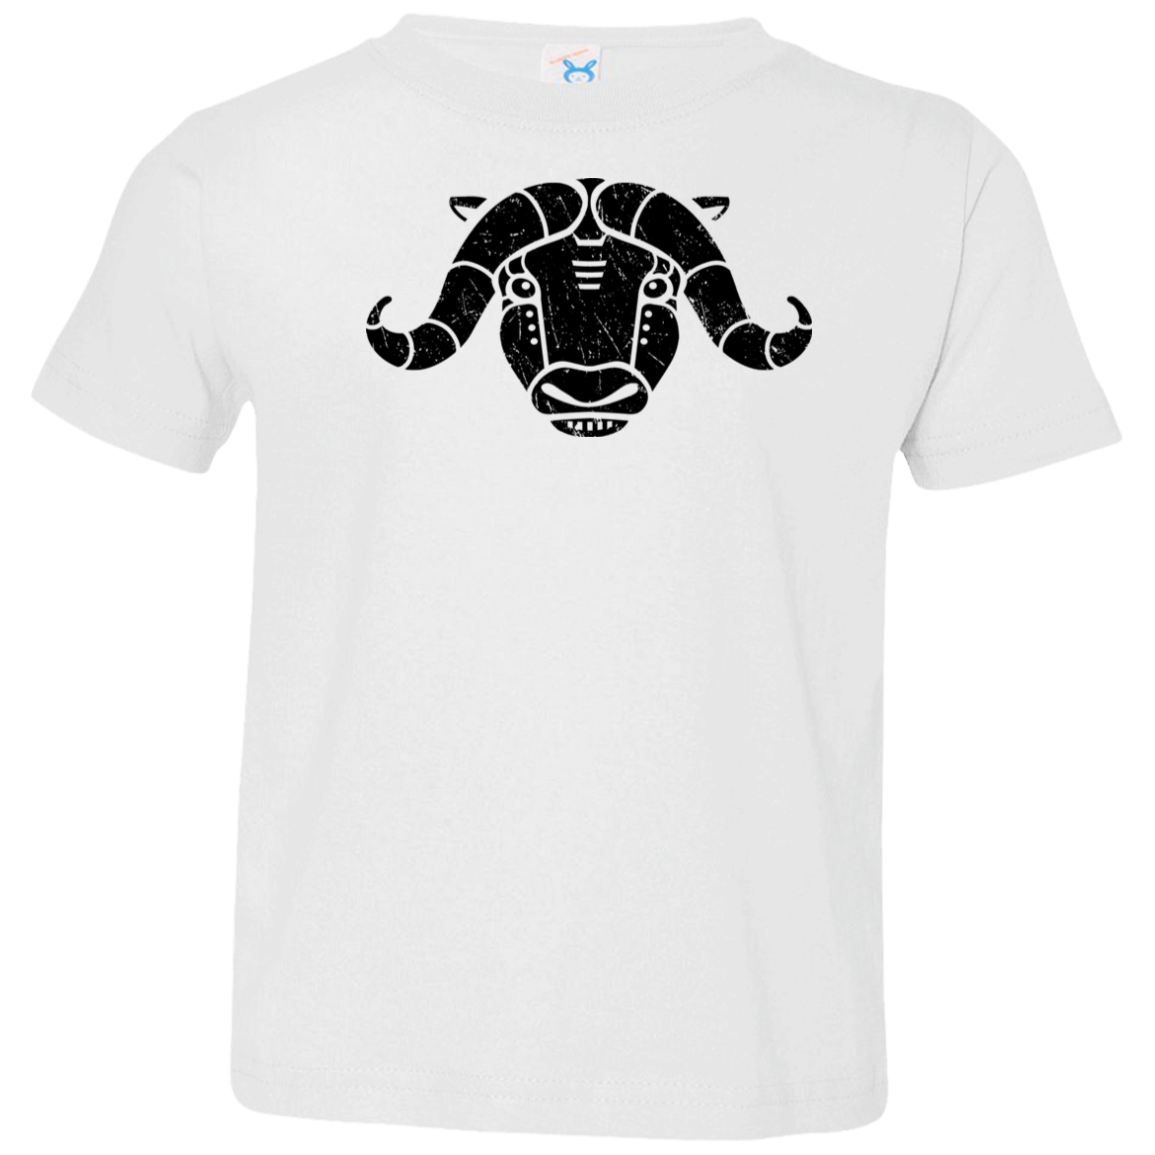 Black Distressed Emblem T-Shirt for Toddlers (Musk Ox/Moxie)